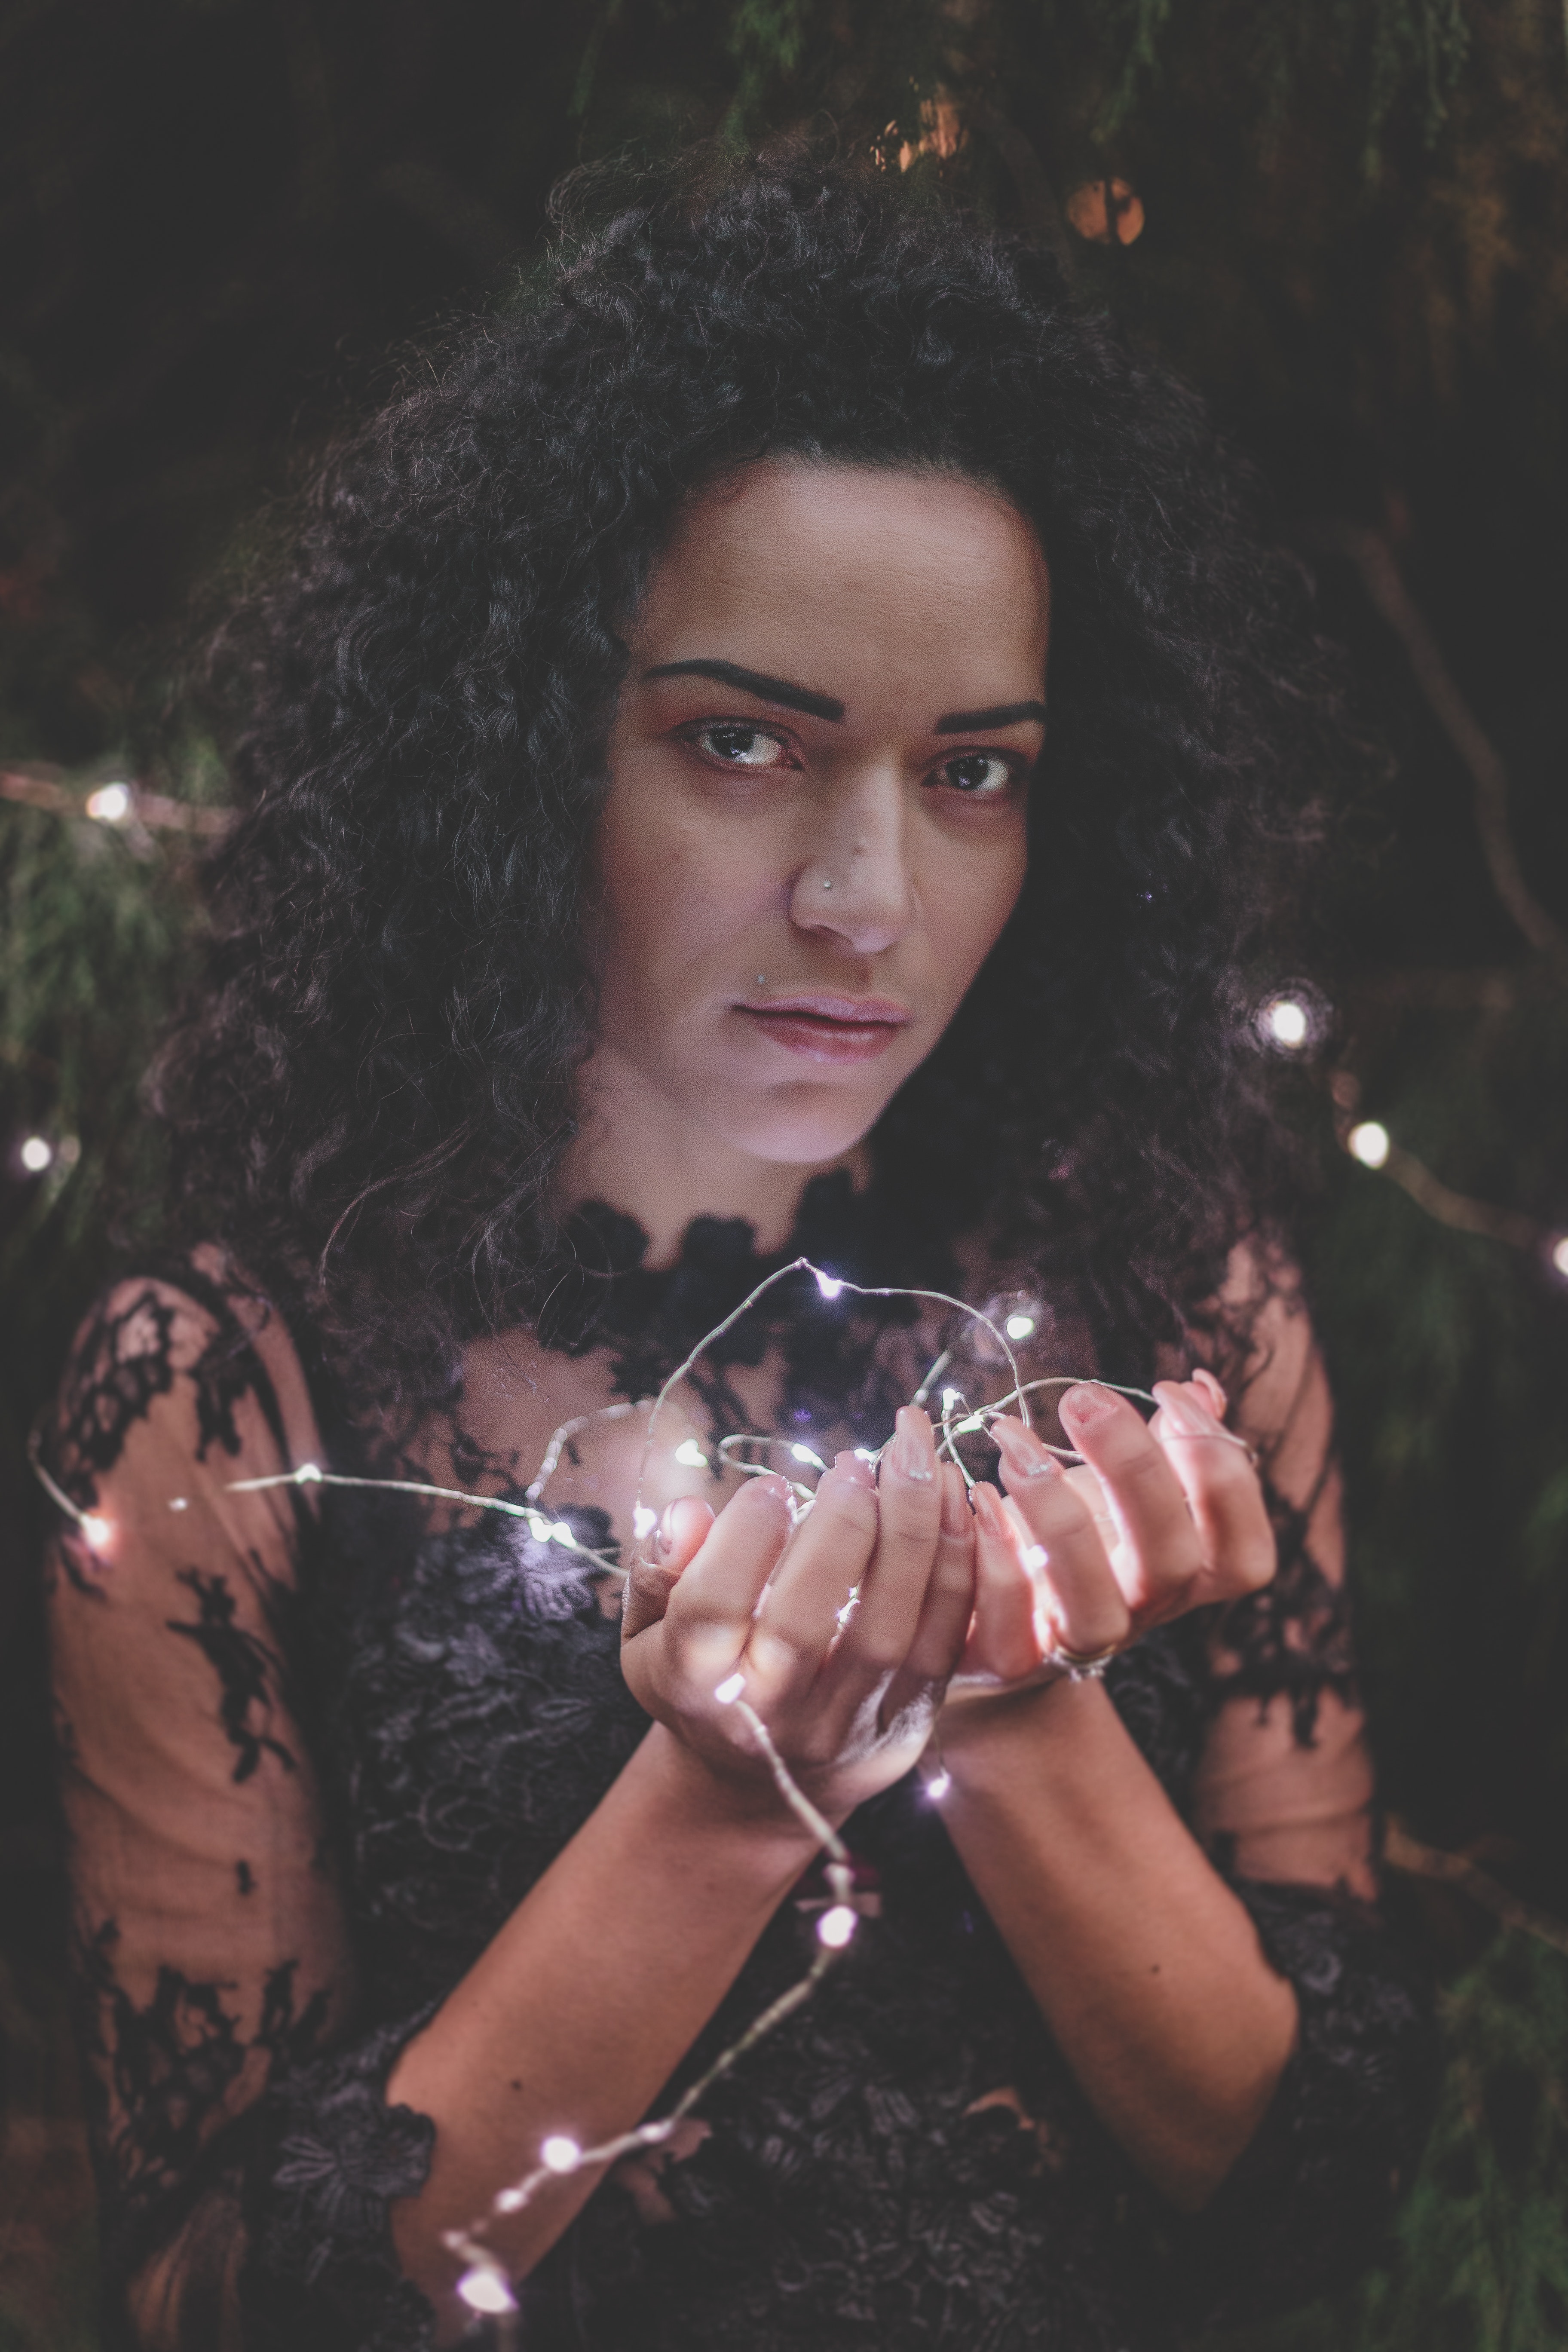 Woman in black lace dress holding string lights photo